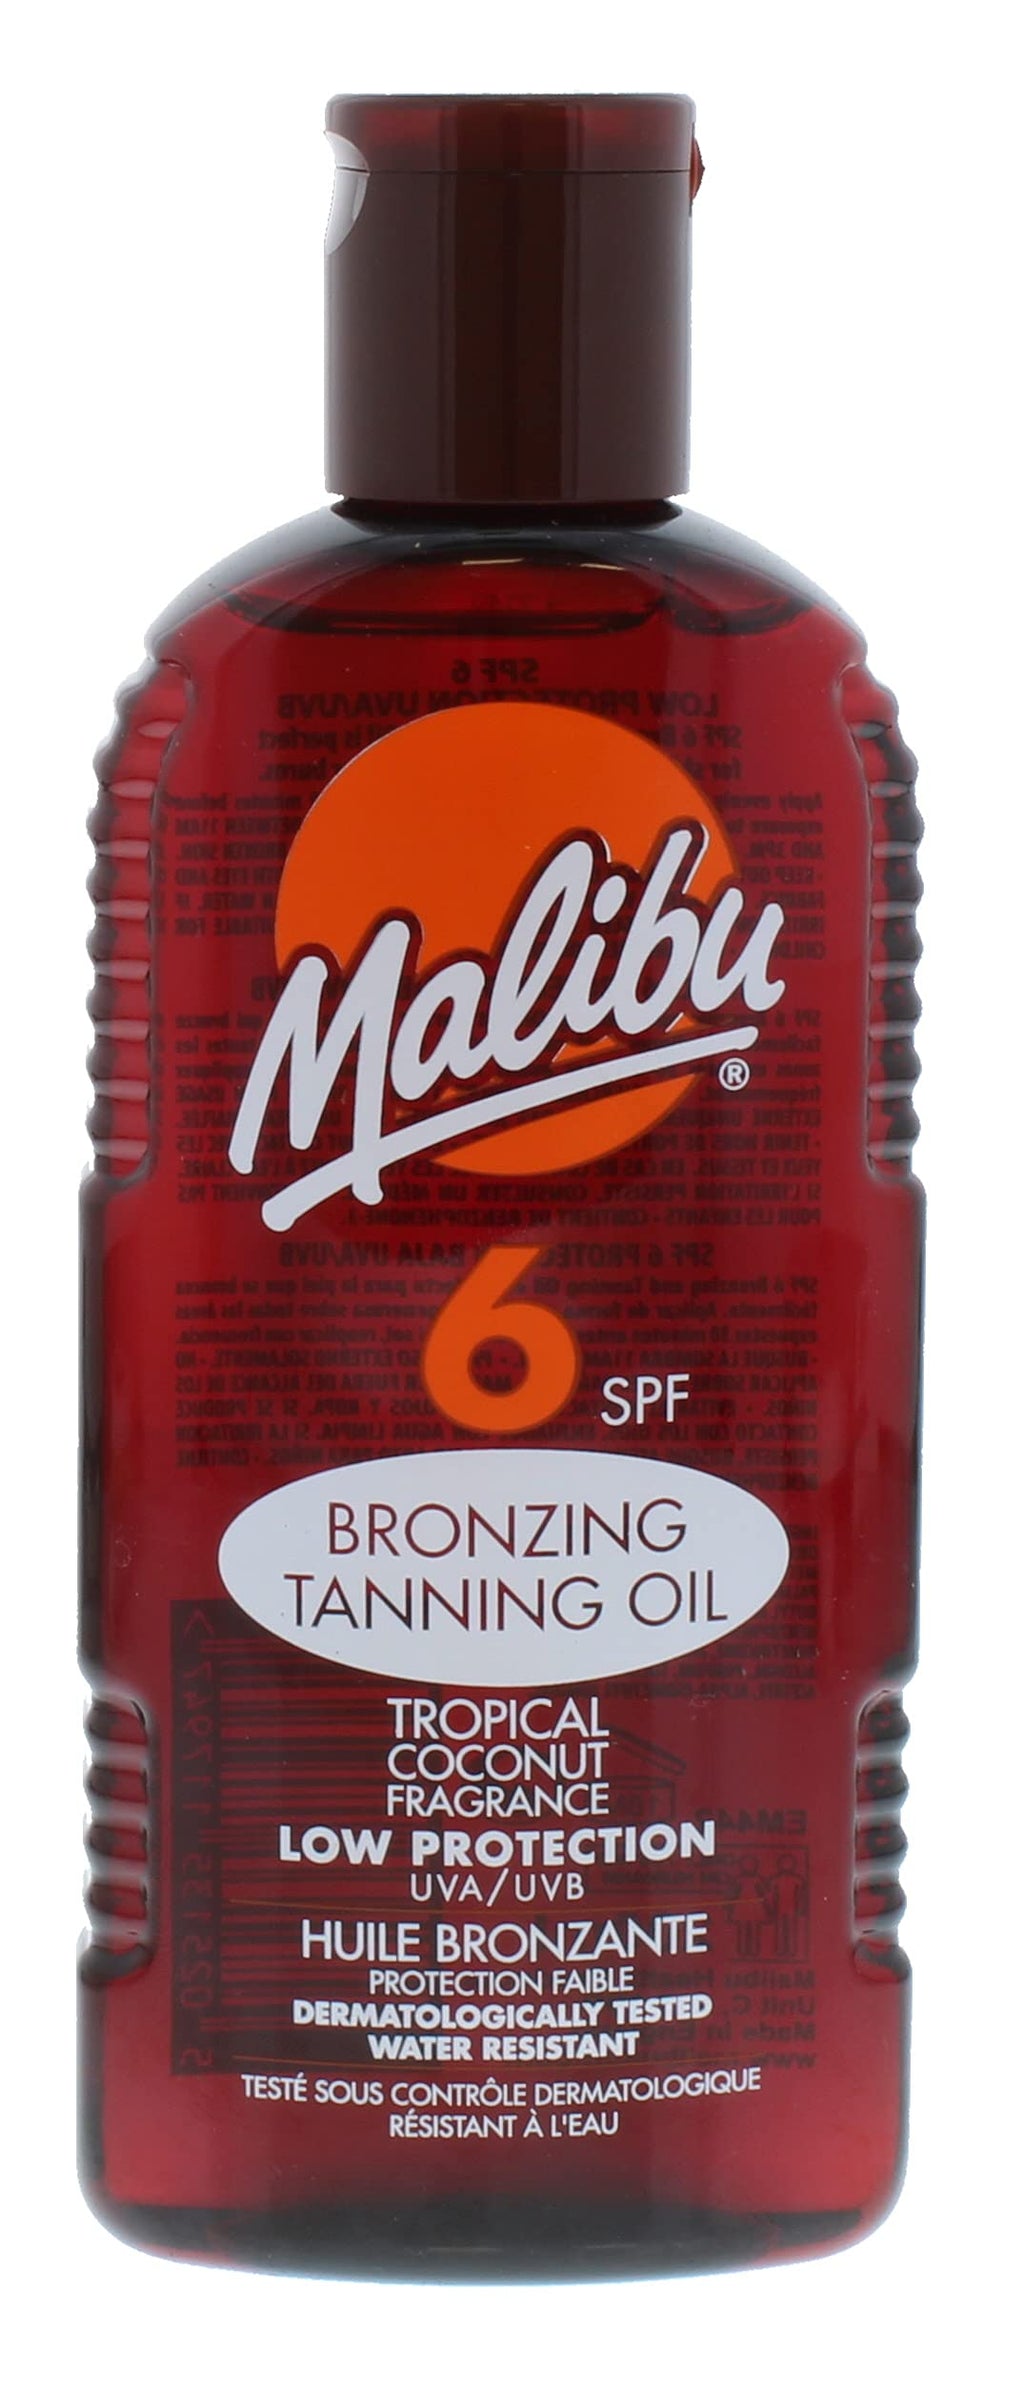 Malibu Low Sun Protection Water Resistant Bronzing Tanning Oil SPF 6 with Tropical Coconut Fragrance, 200ml - NewNest Australia